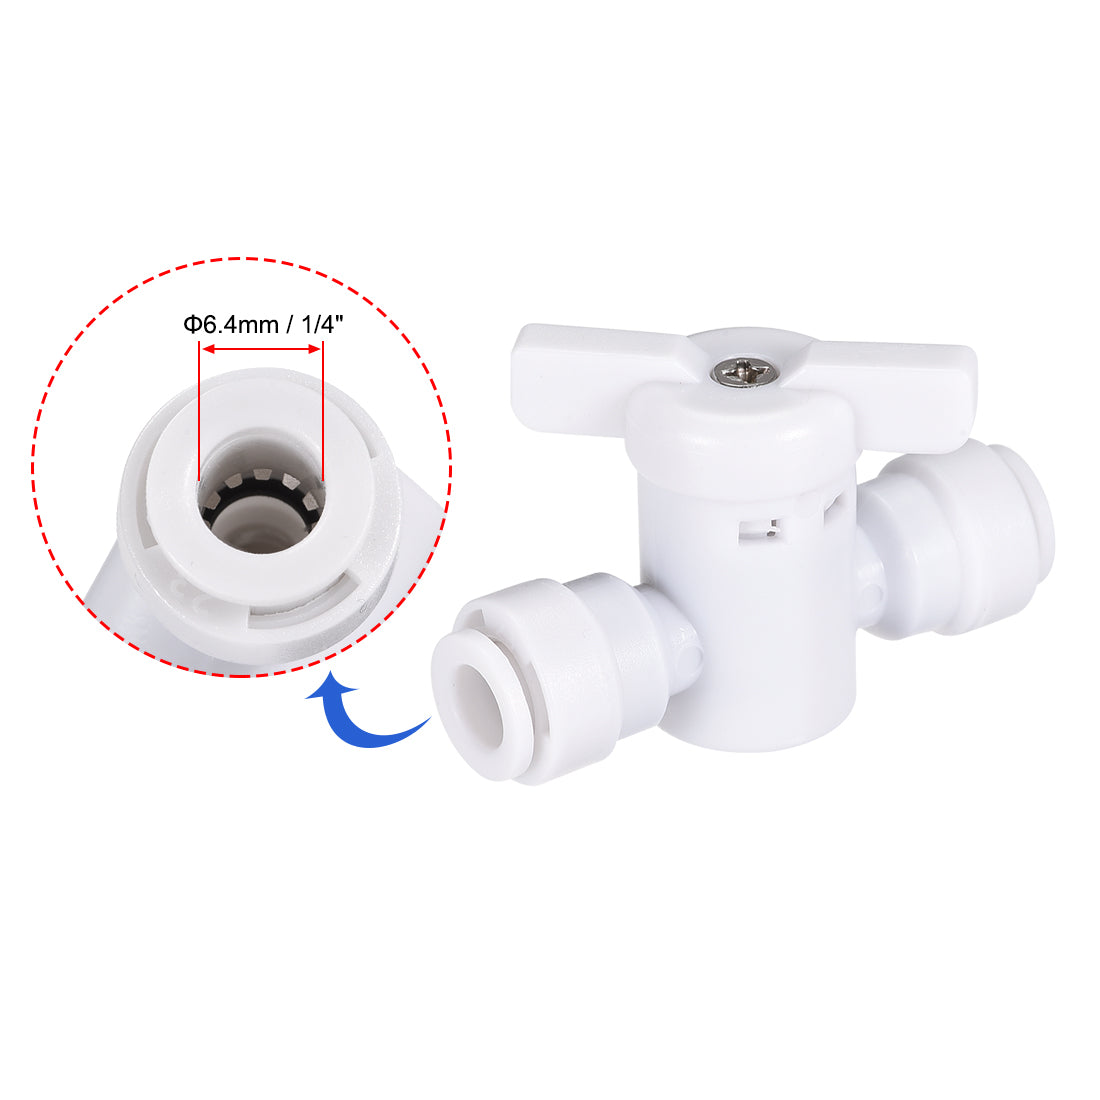 uxcell Uxcell Ball Valve Quick Connect Fitting, 1/4" Tube Outer Diameter, for Water Purifiers, White 10Pcs